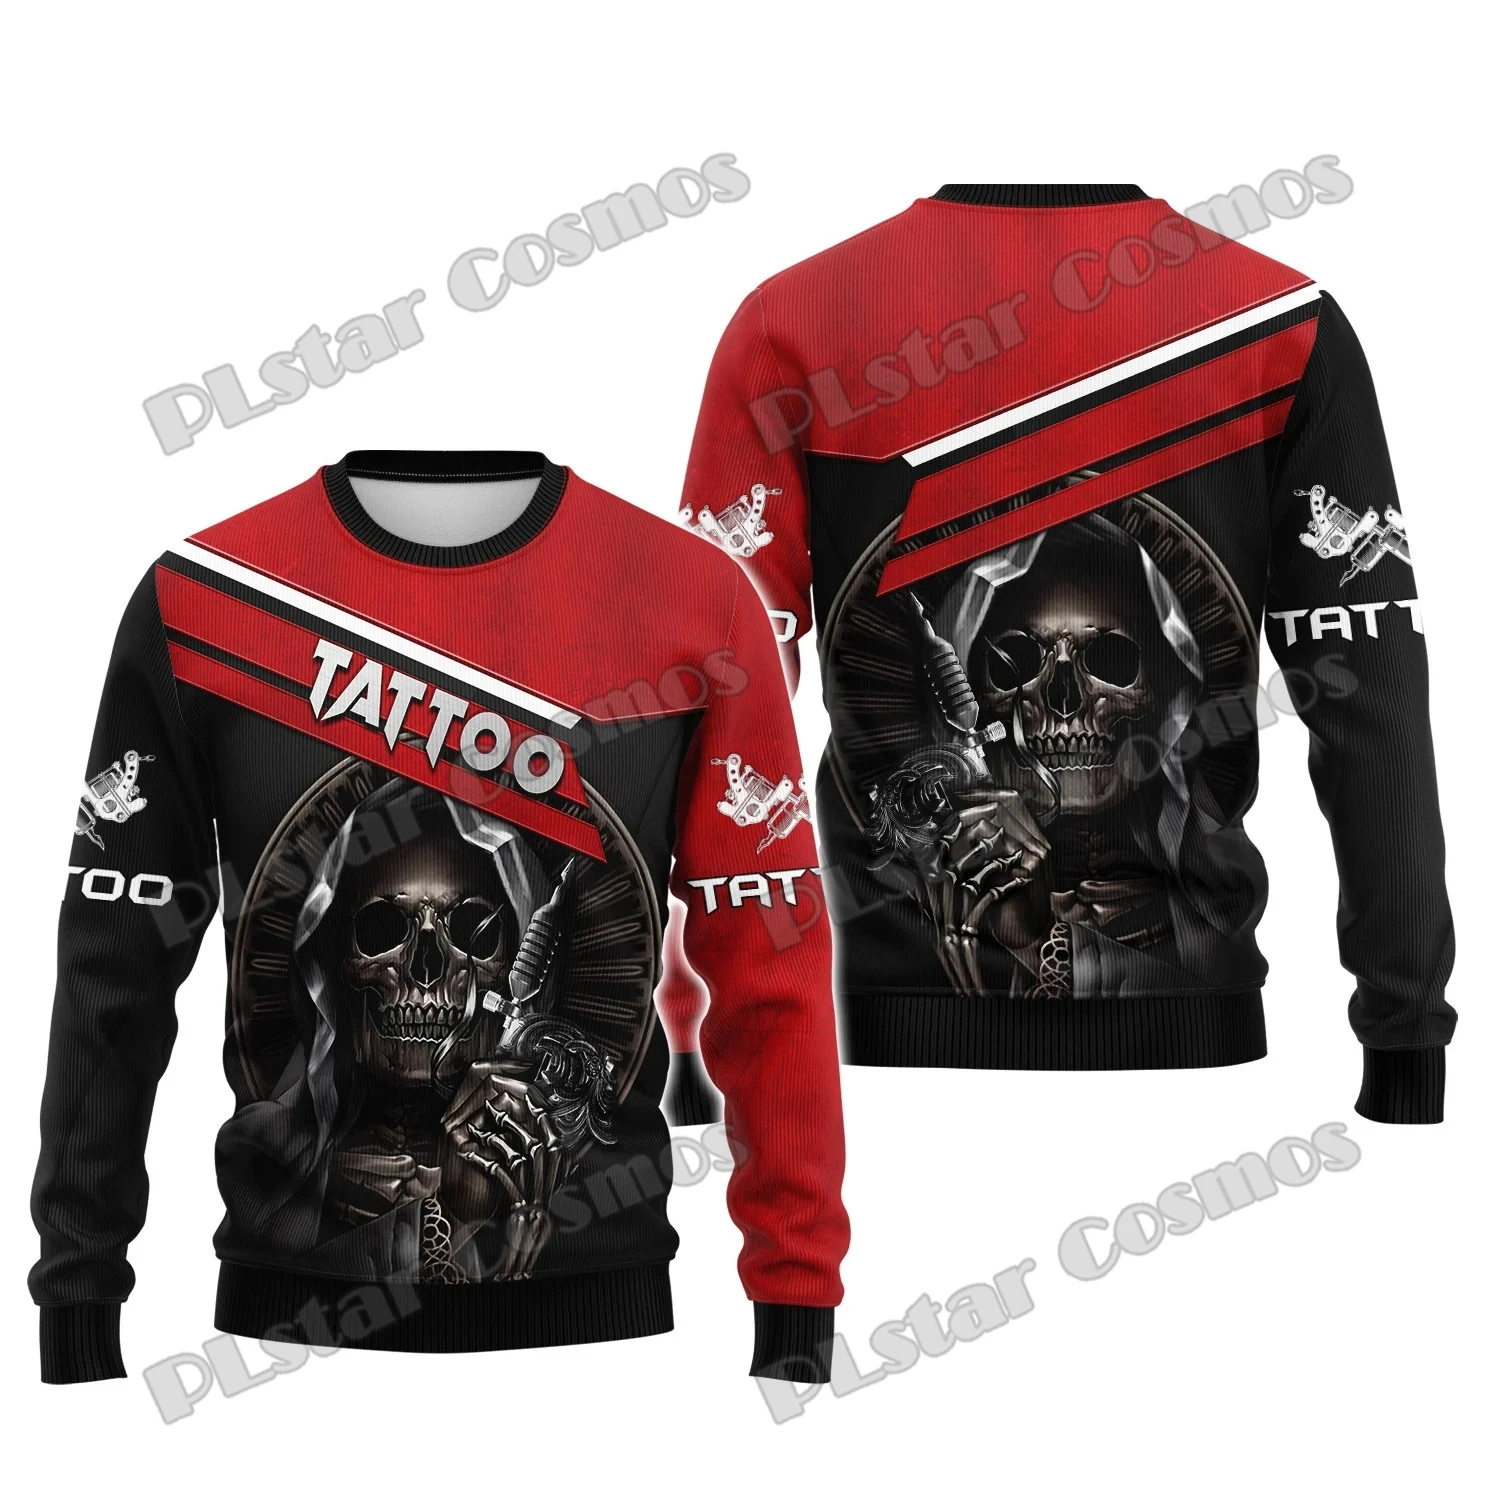 

Latest Tattoo skull Artist Shop 3D Printed Men's Fashion O-Neck Sweater Autumn Unisex Casual Knitwear Long sleeve Pullover MY01